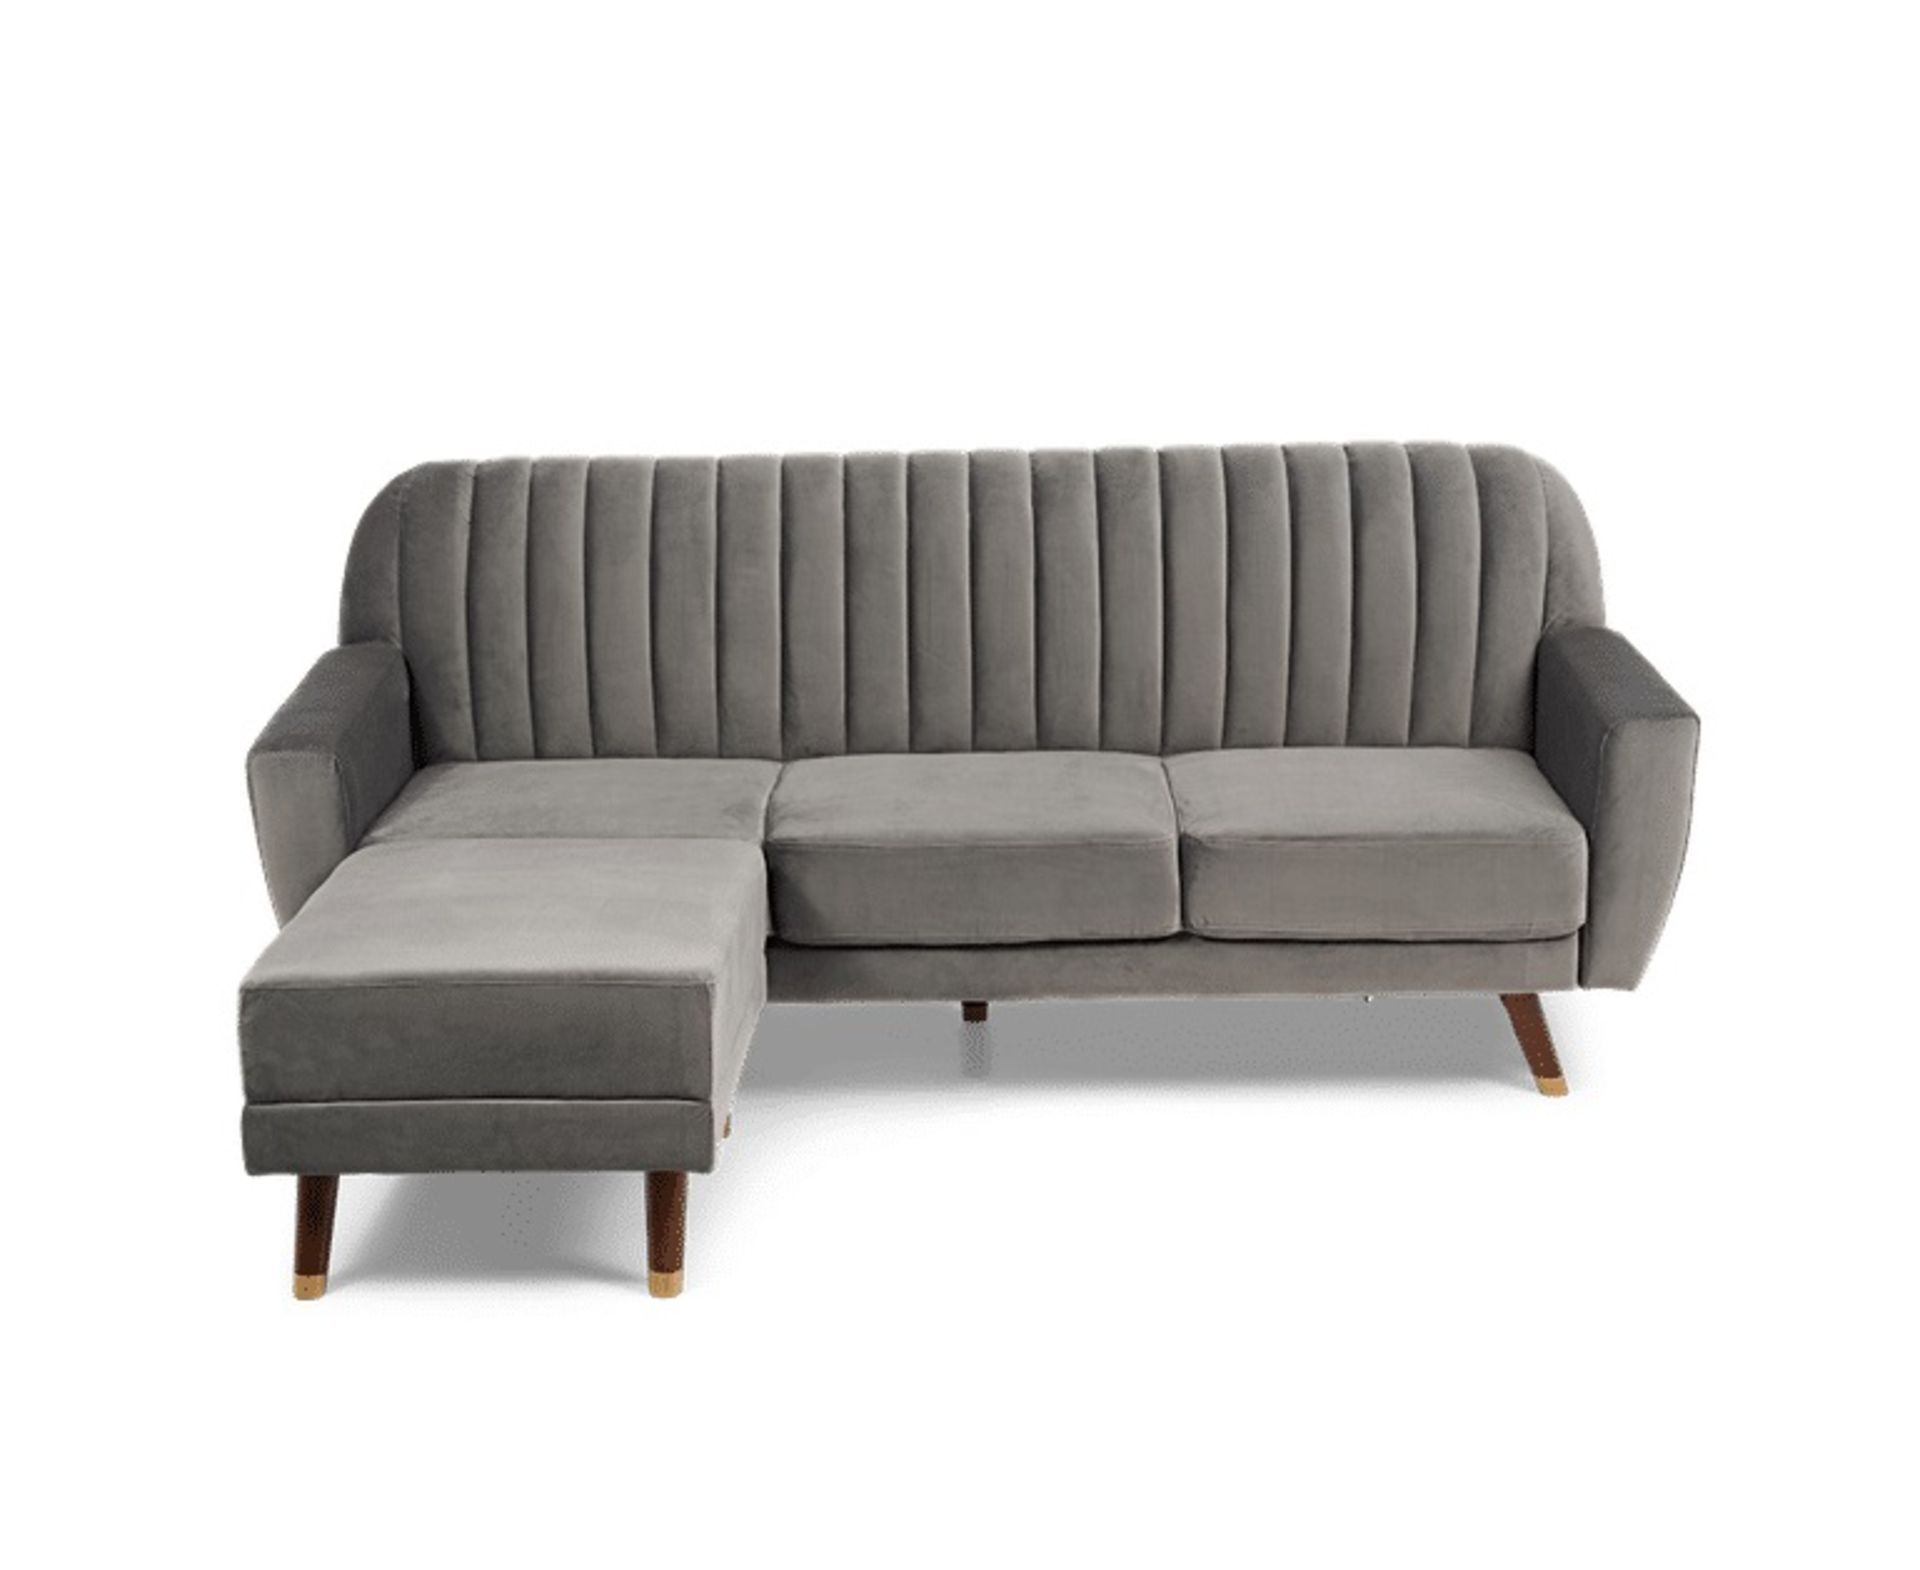 Lucia Reversible Sofa Bed in Grey Velvet Retro-inspired and minimalist in shape, the Lucia